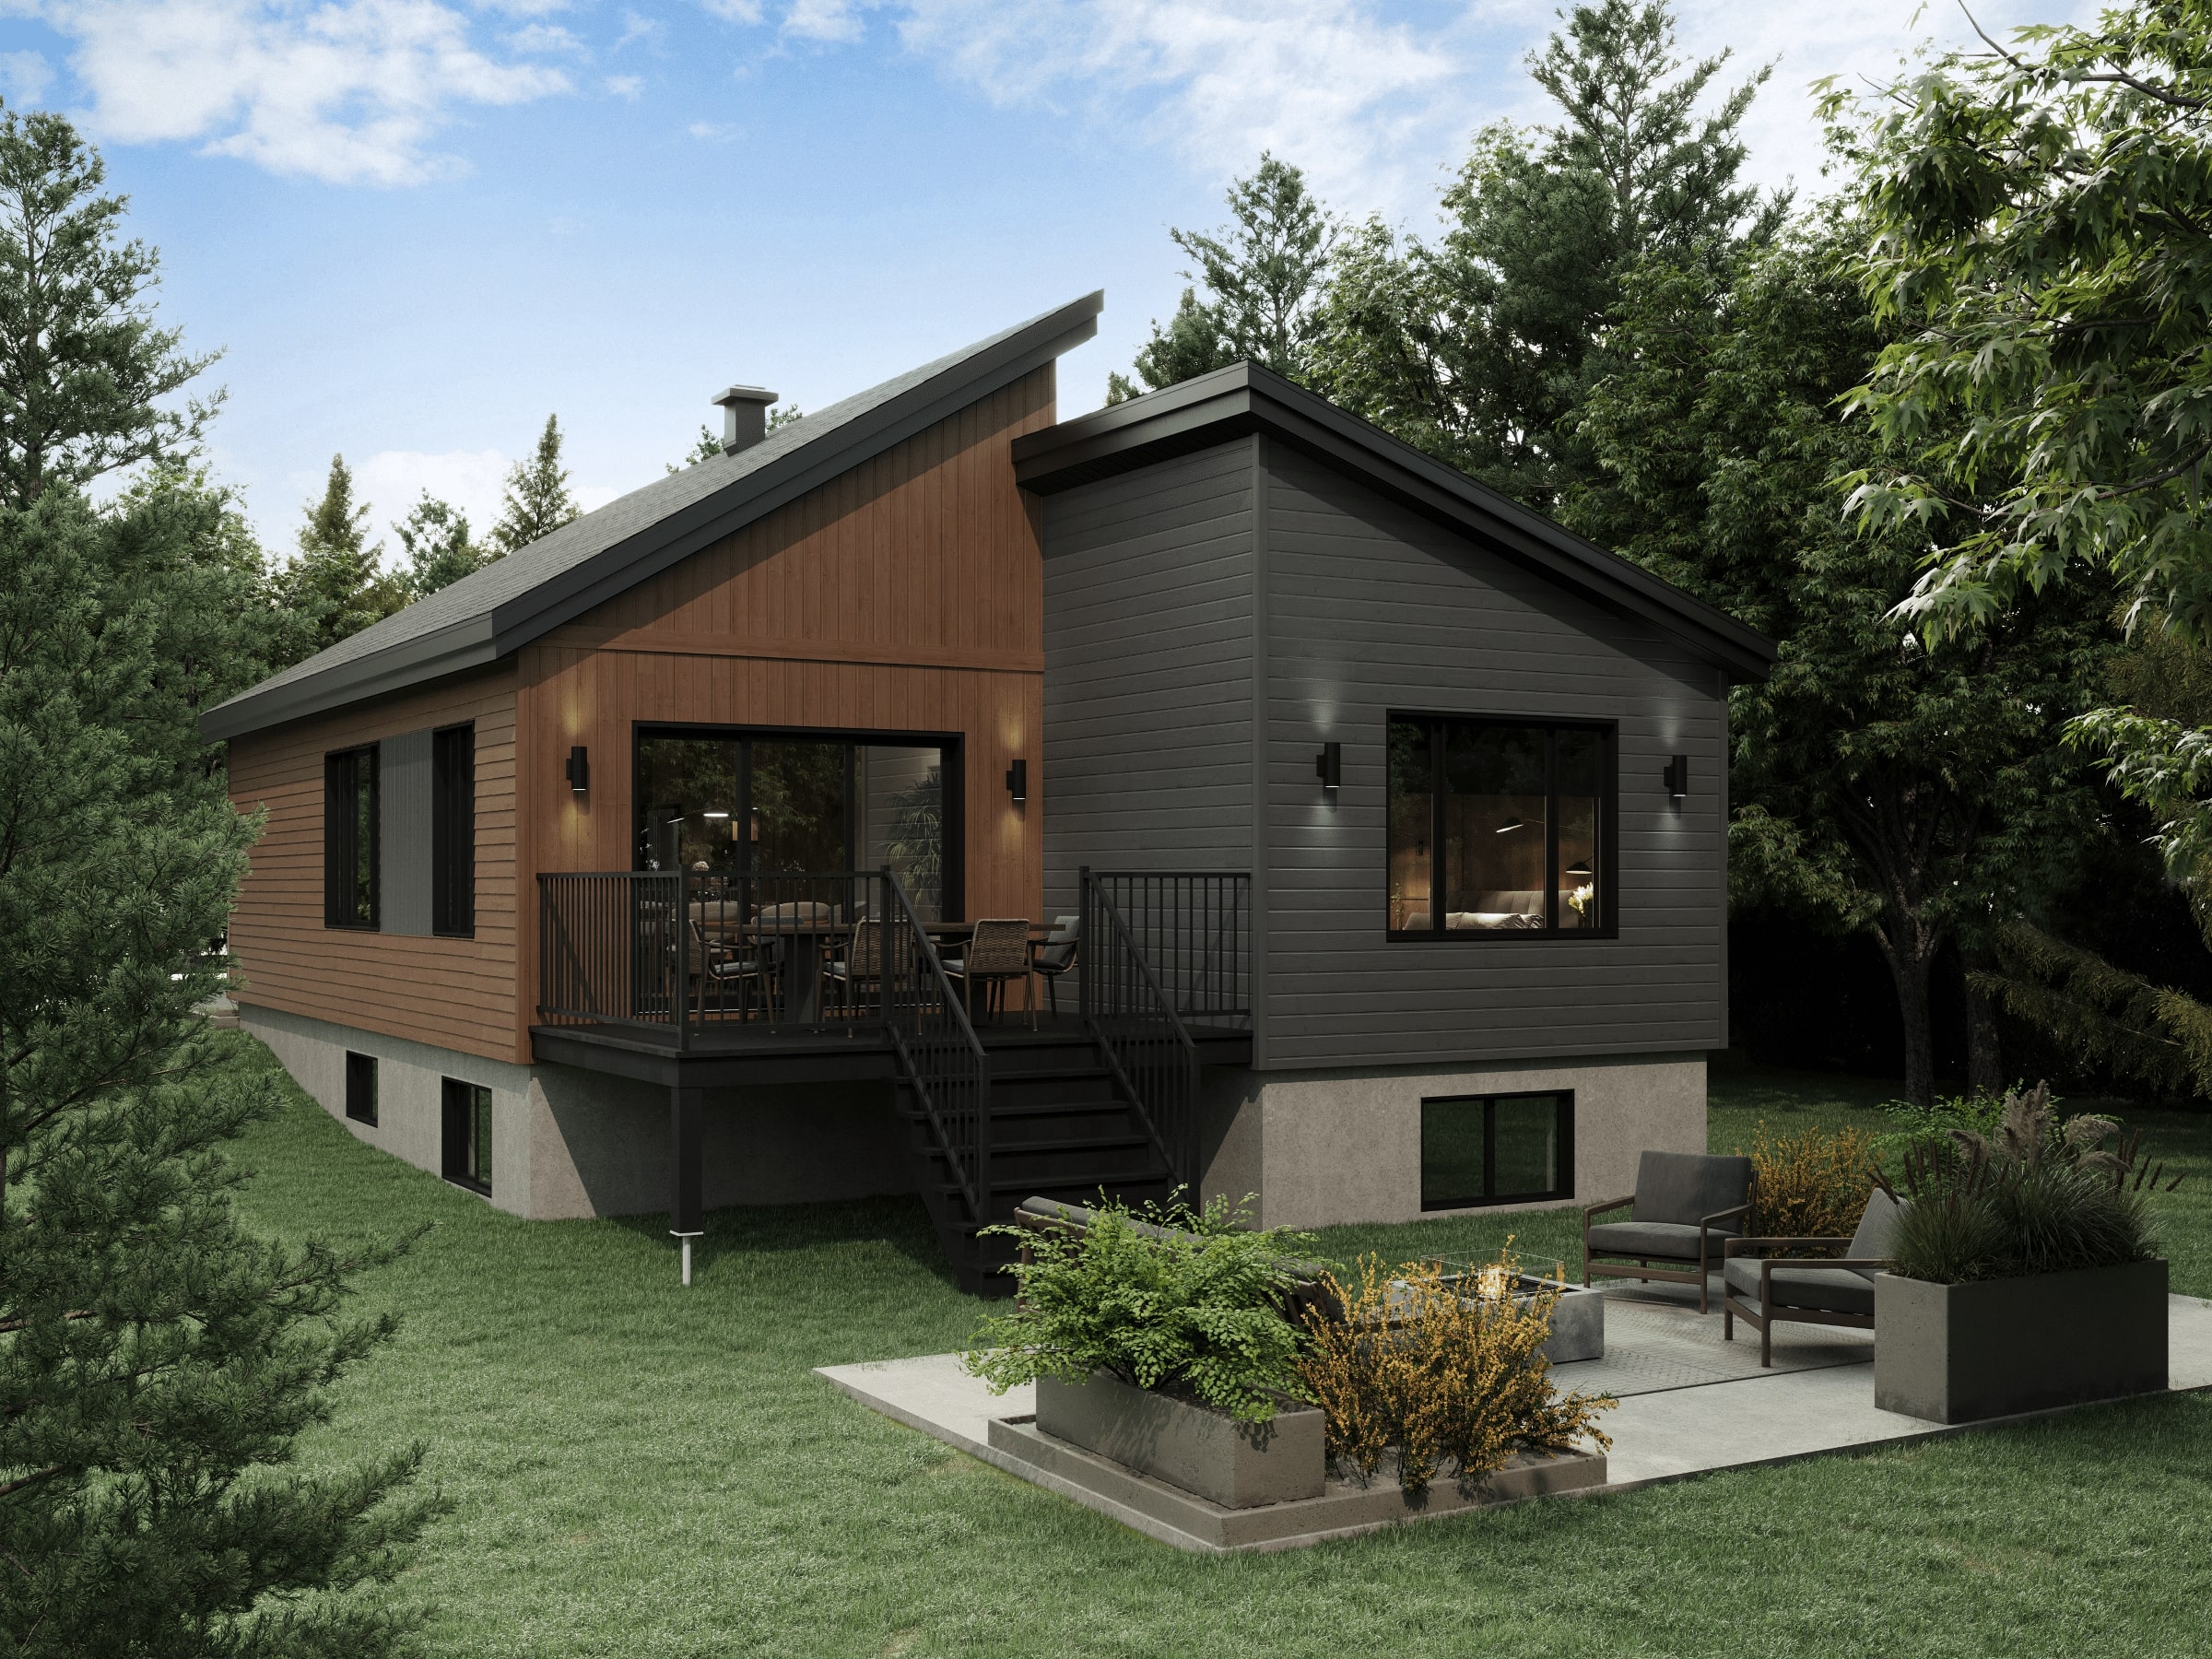 The Svalla model is a midcentury-style chalet. Exterior rear view.